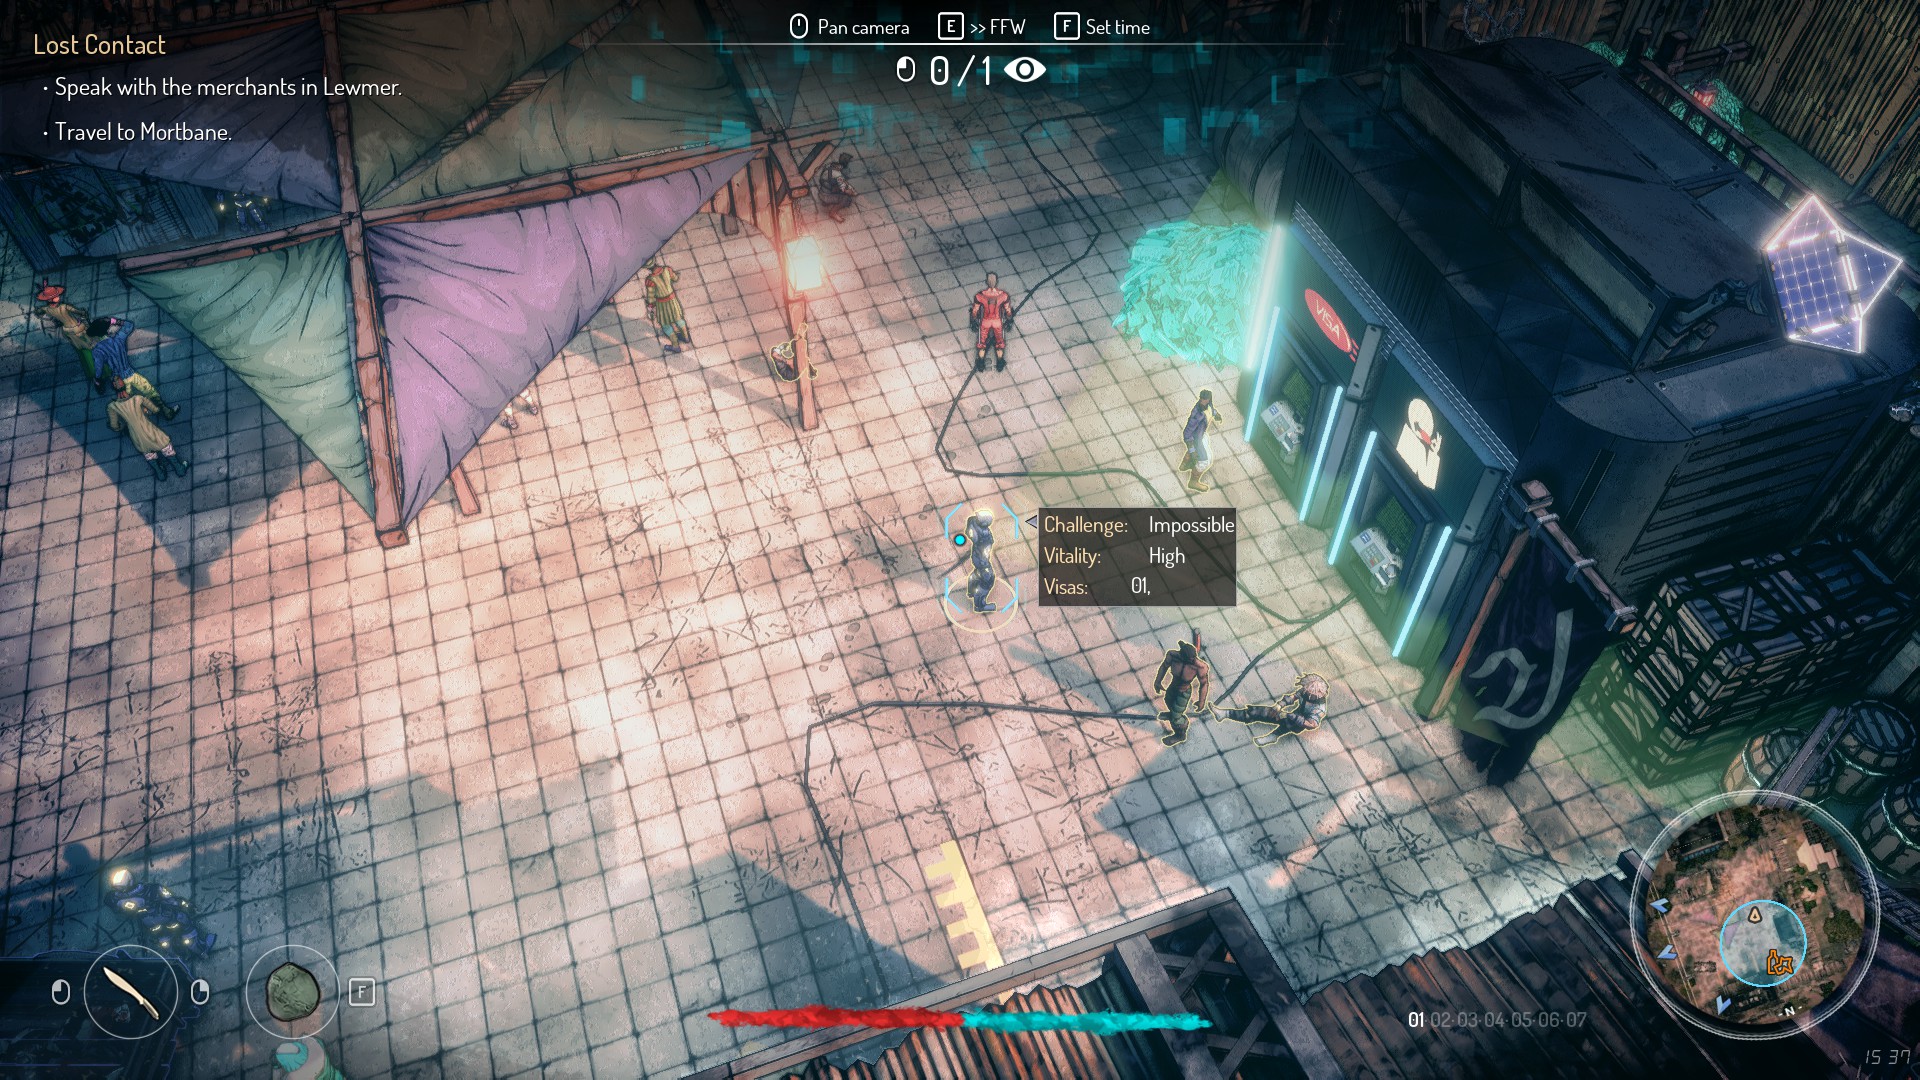 Stealth RPG Seven Tries To Mash Up Thief And Diablo, But It Doesn’t Work